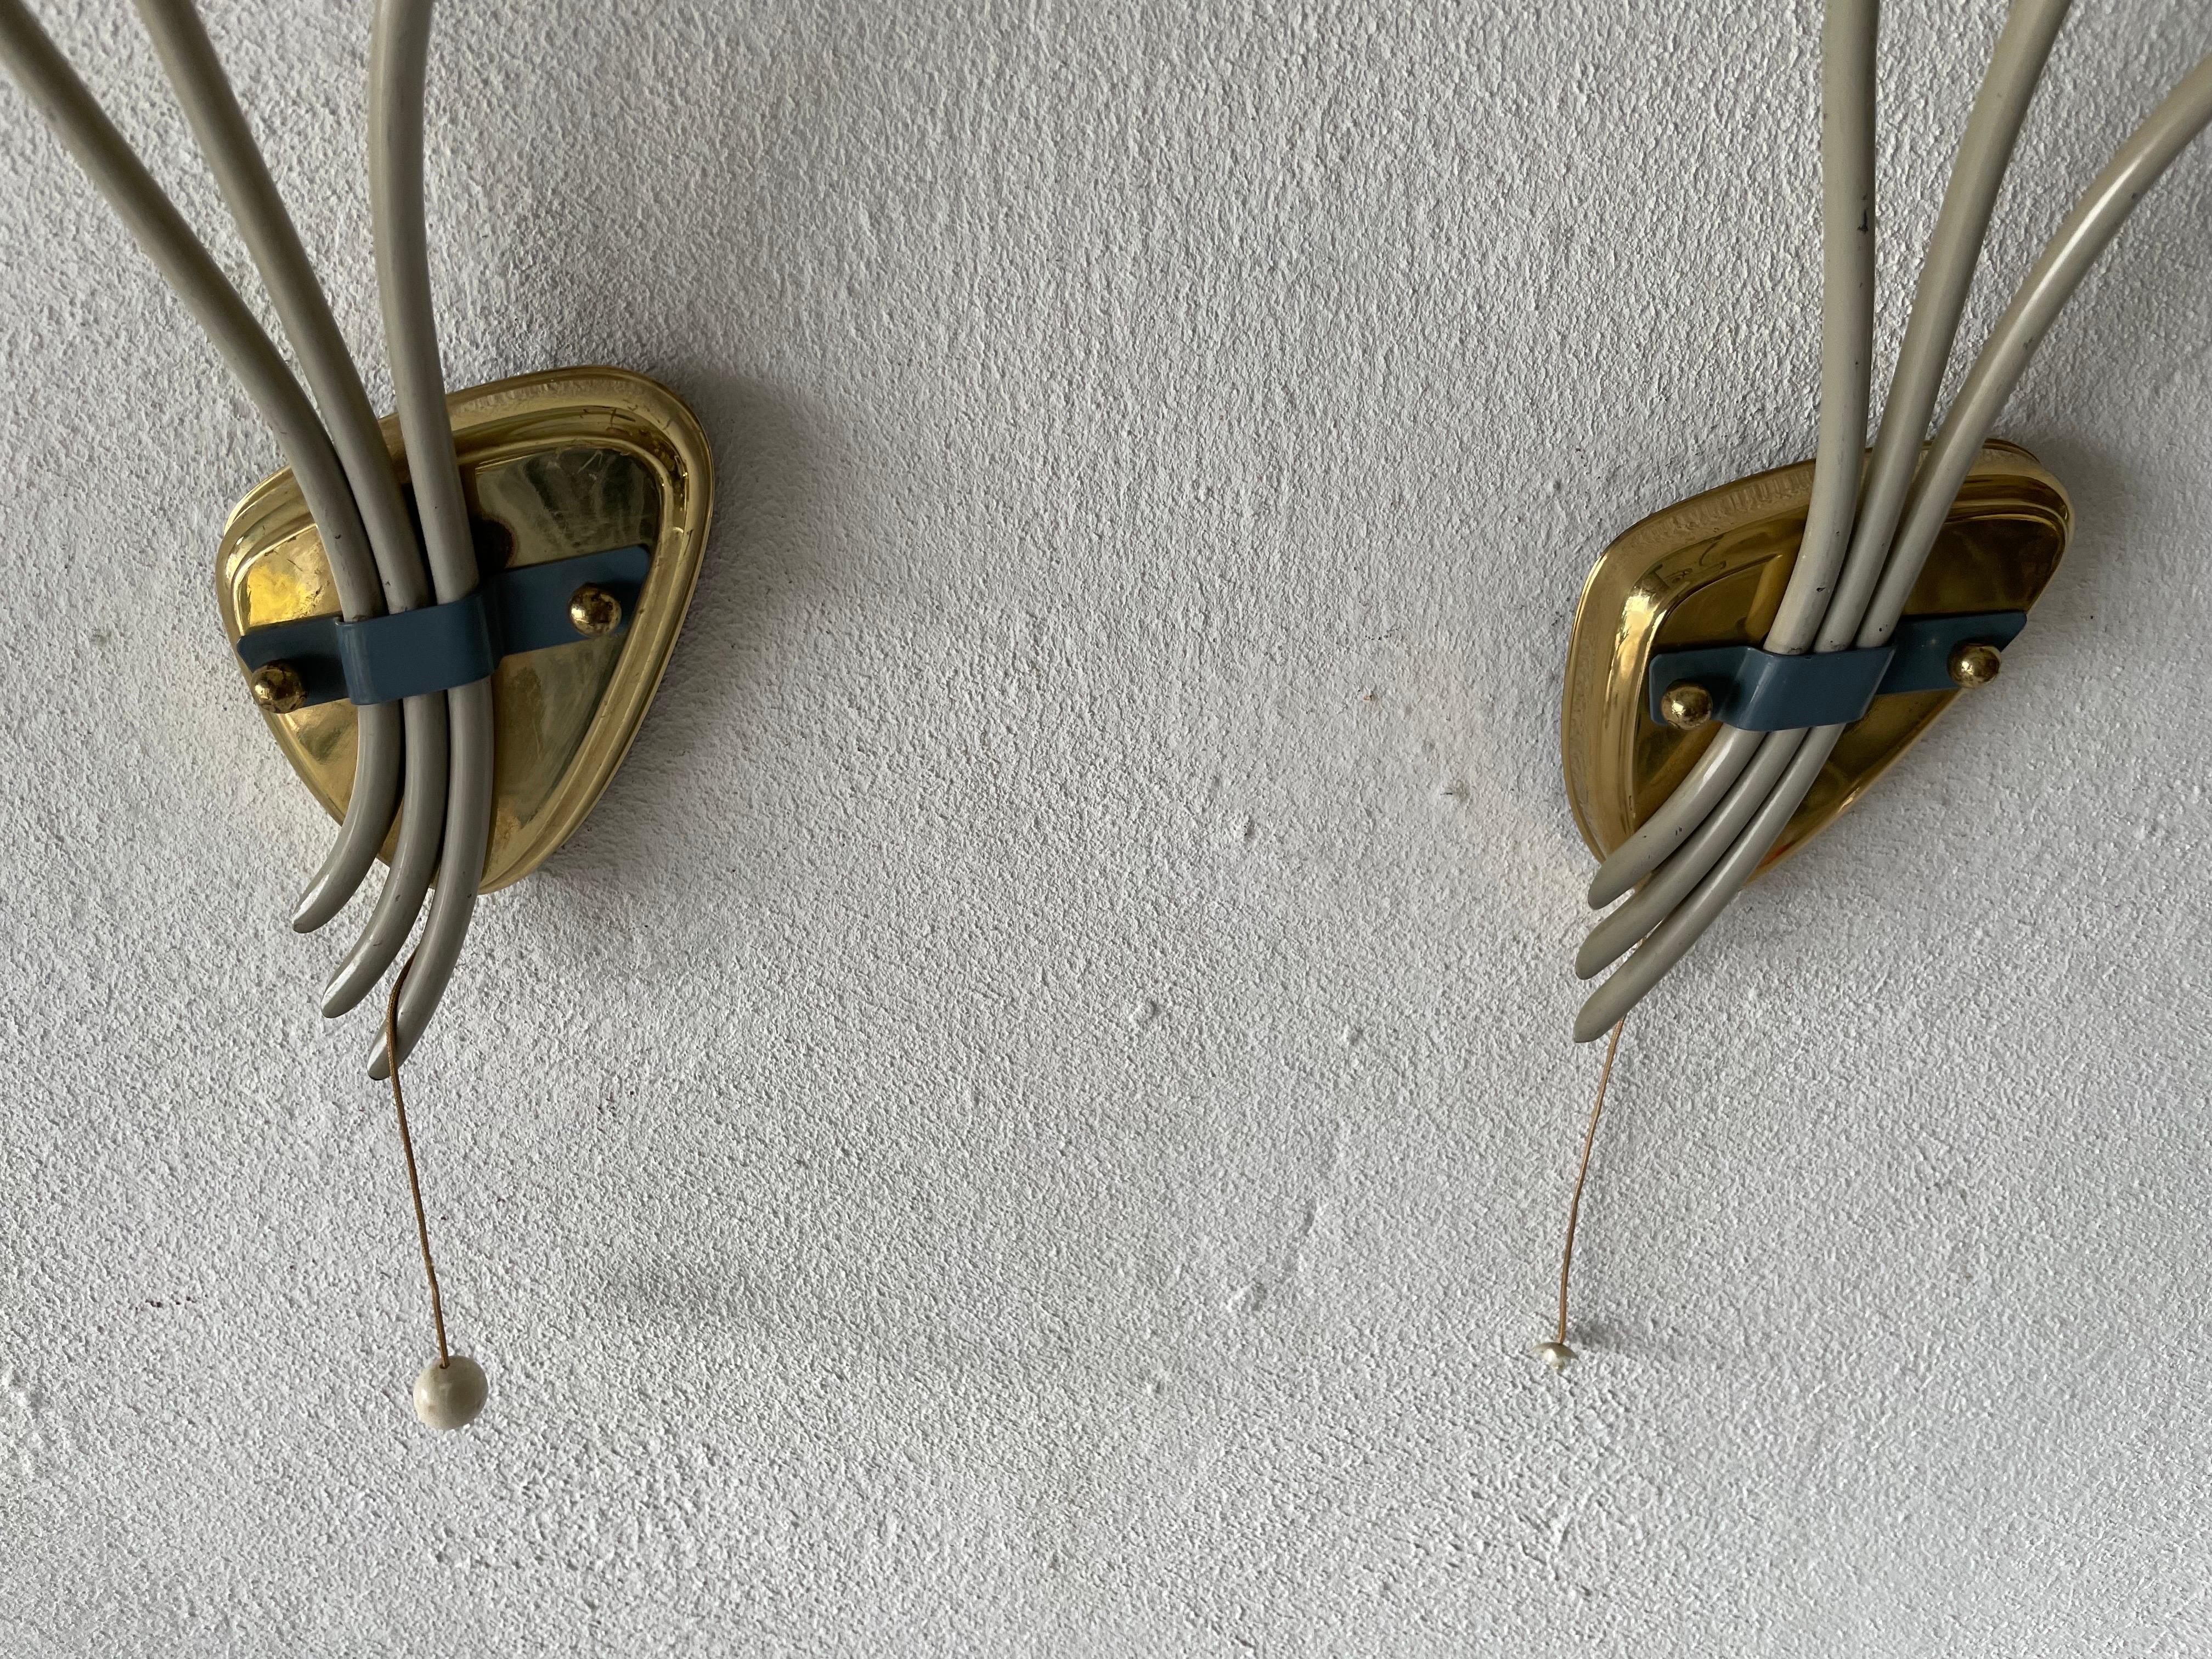 3-head Blue and White Metal Pair of Sputnik Sconces, 1950s, Germany For Sale 4